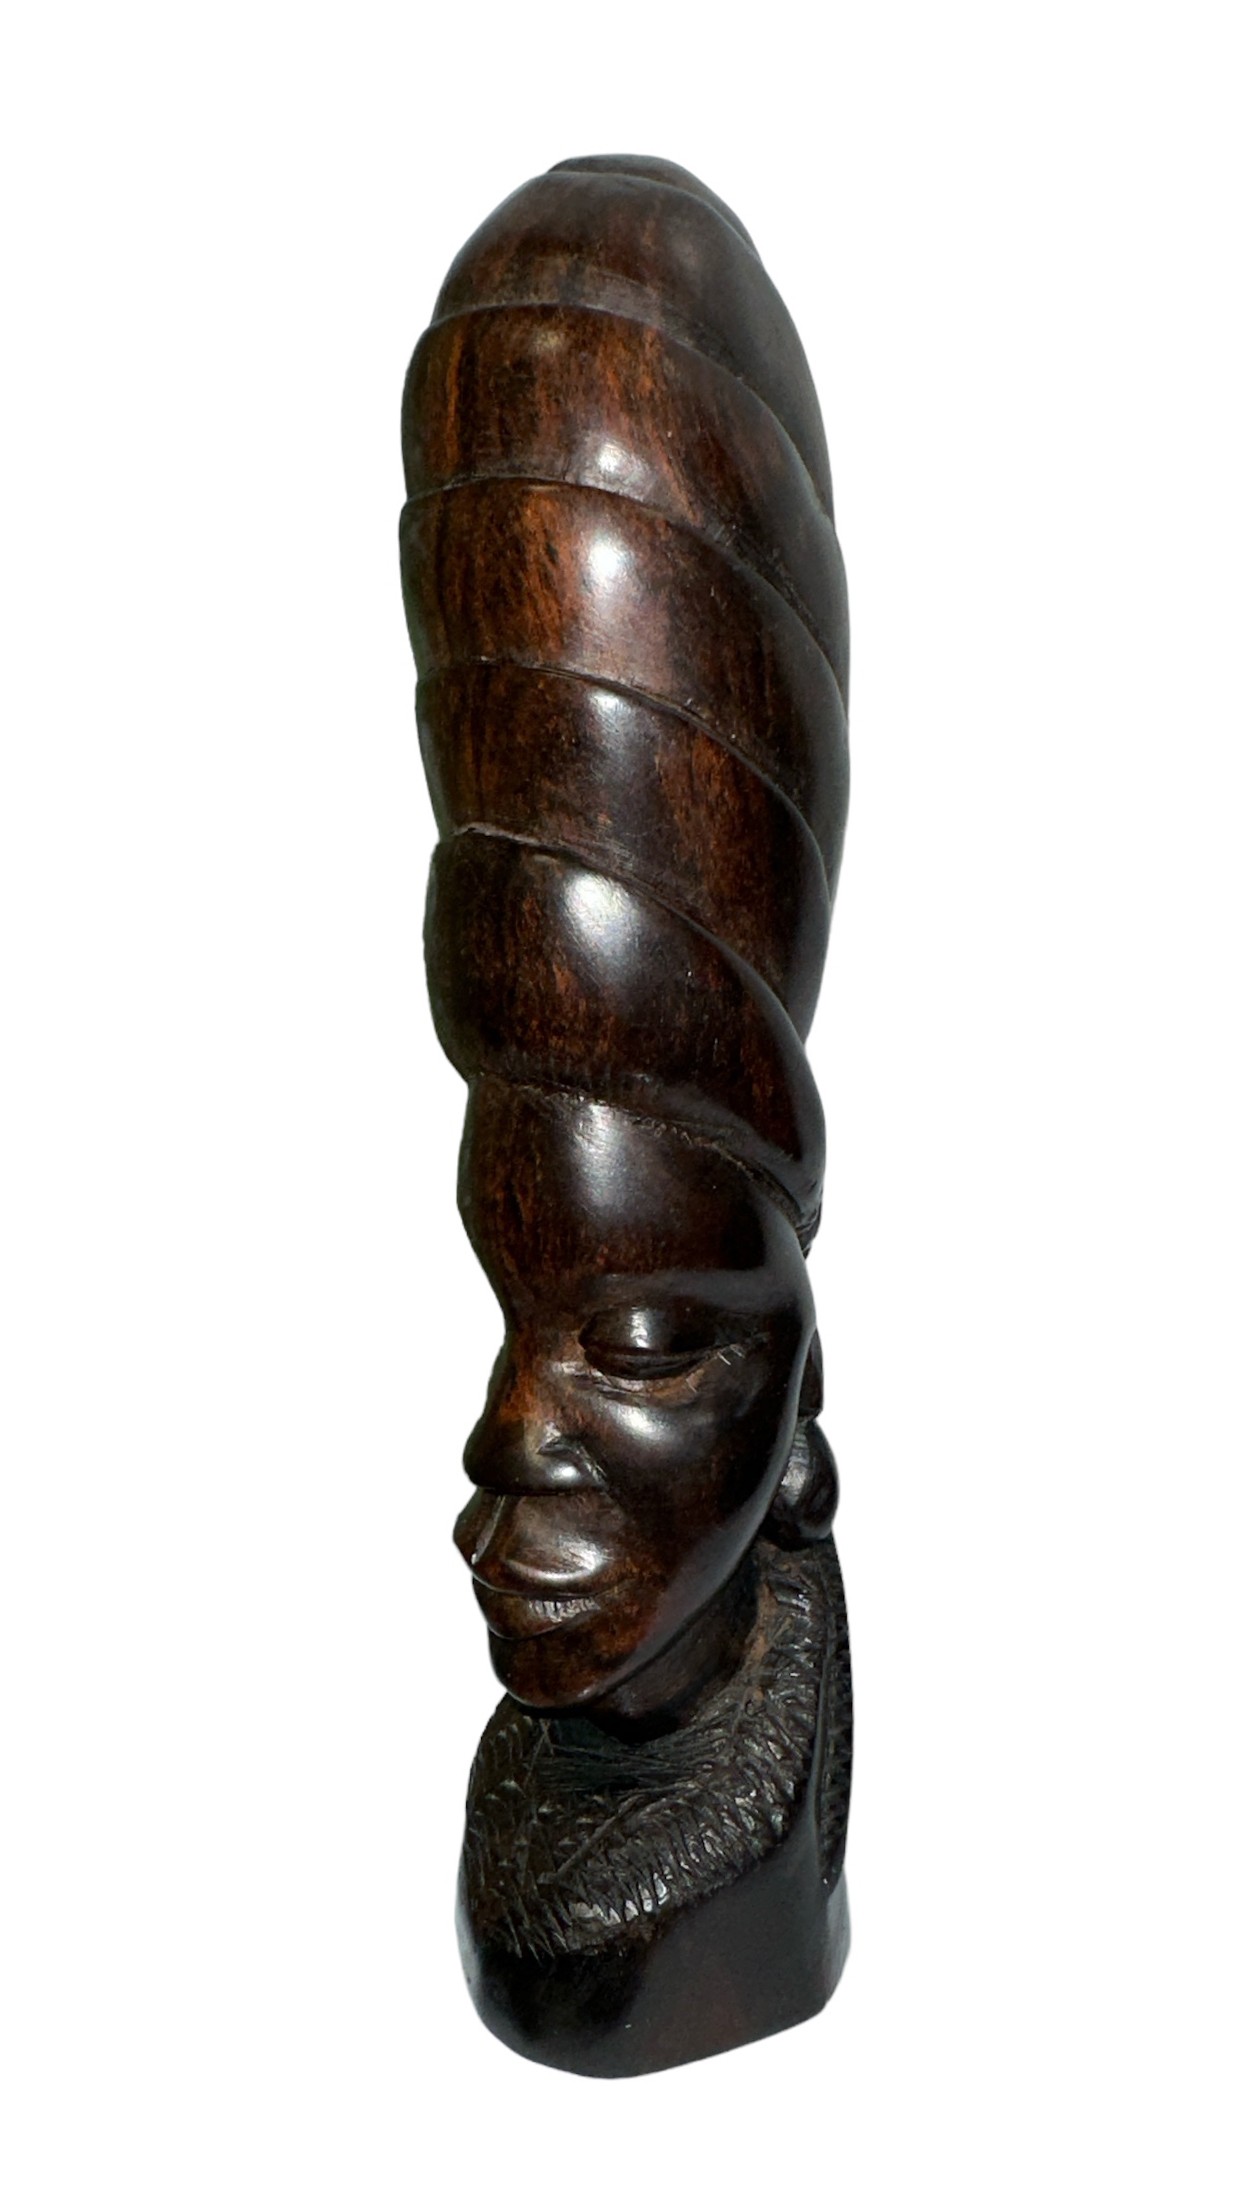 A standing African carved wooden sculpture in the shape of a woman’s head with a phallic design